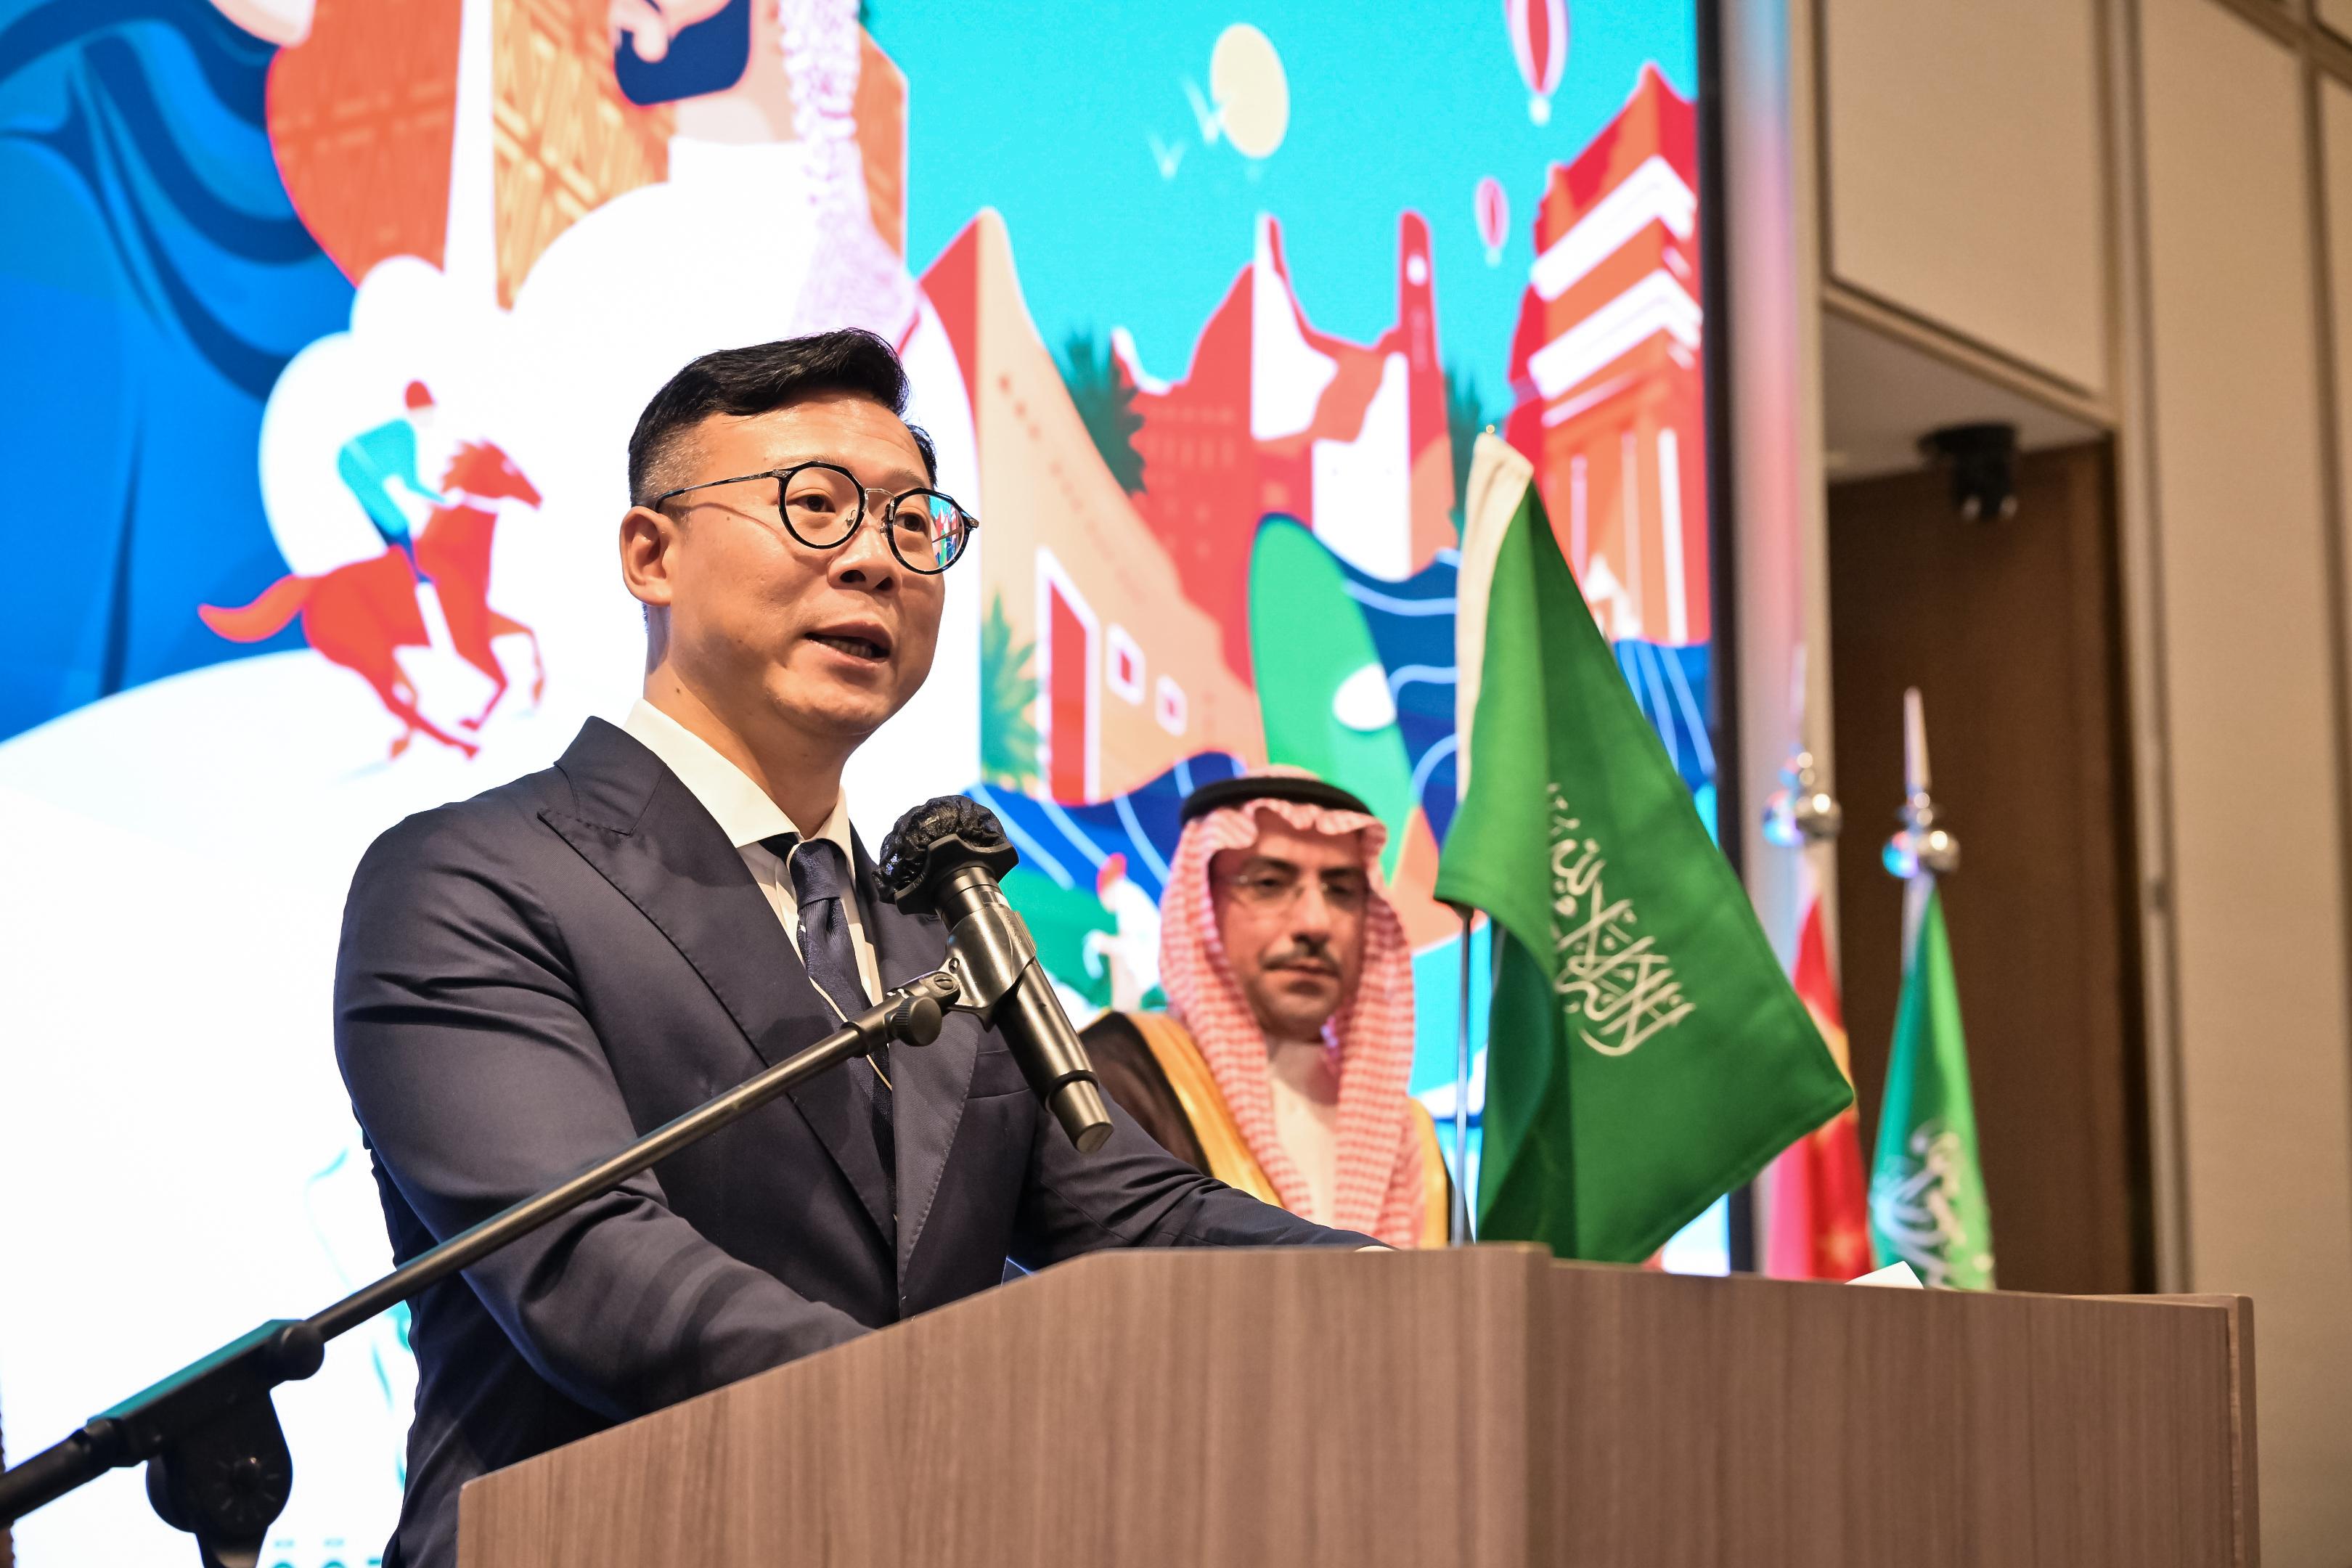 The Deputy Secretary for Justice, Mr Cheung Kwok-kwan, speaks at the reception of National Day of Kingdom of Saudi Arabia today (September 22).

